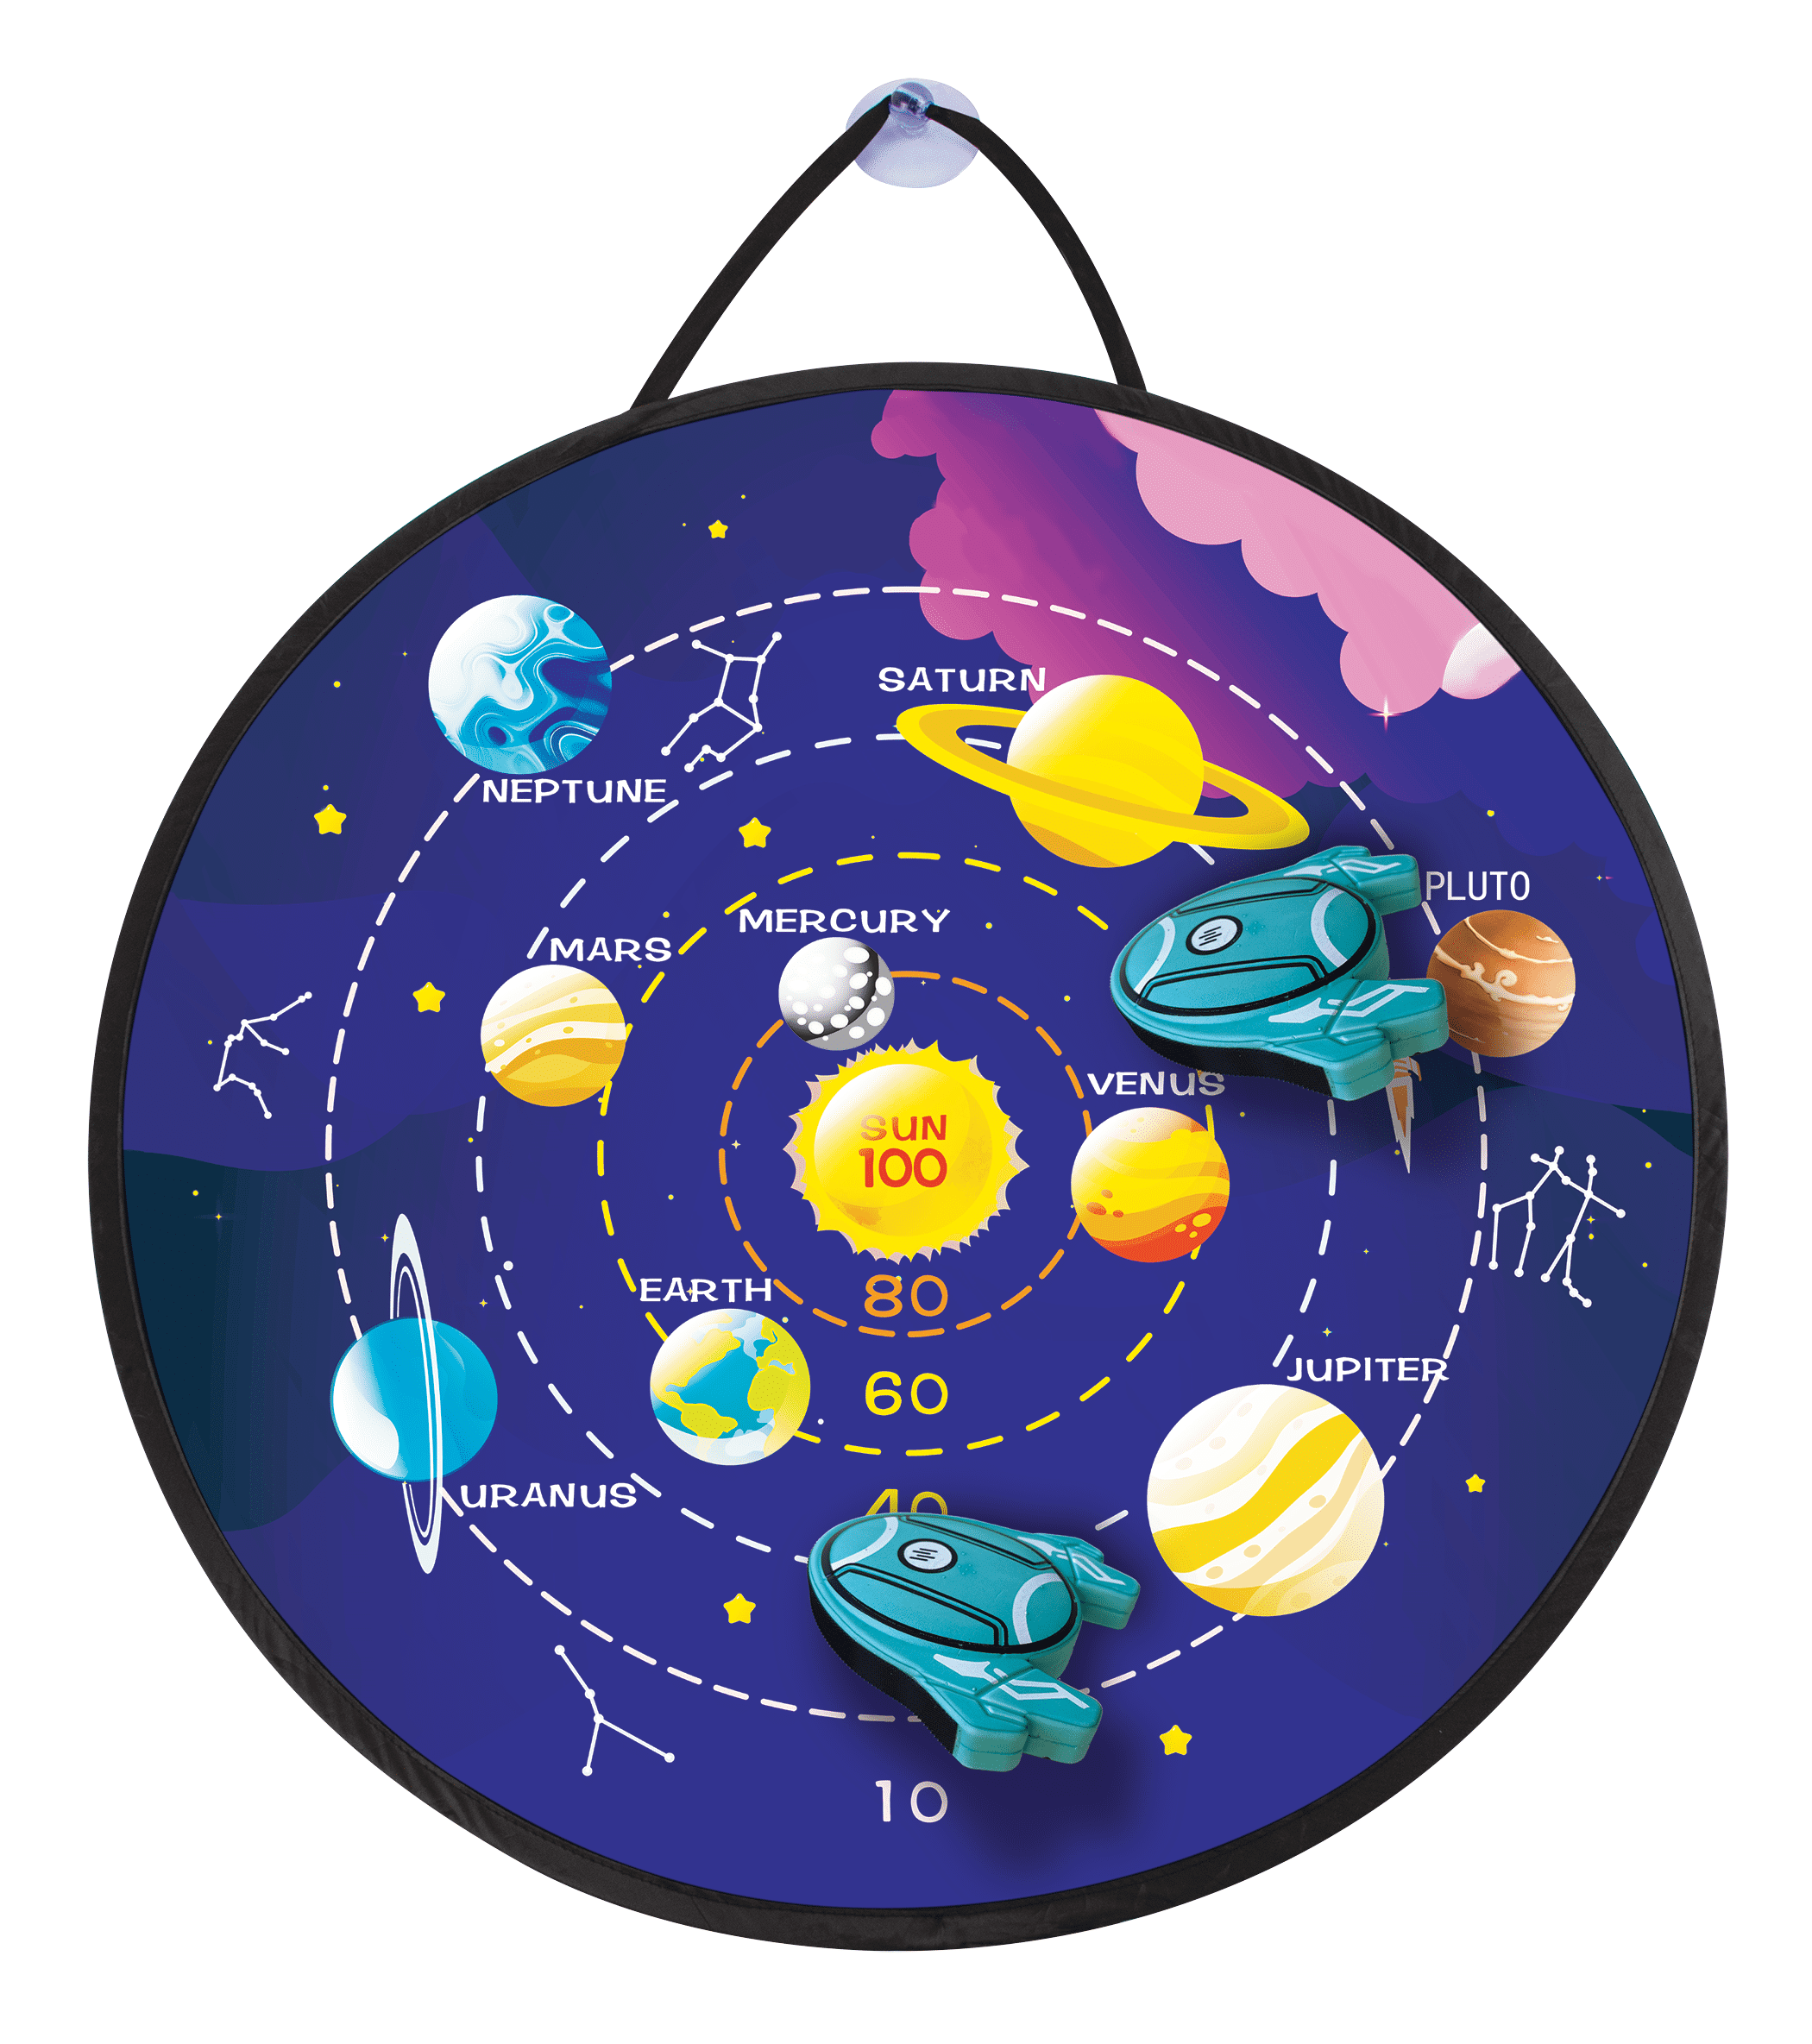 Planetary Rocket Target Toss Game, Fabric, Boys and Girls, Kids